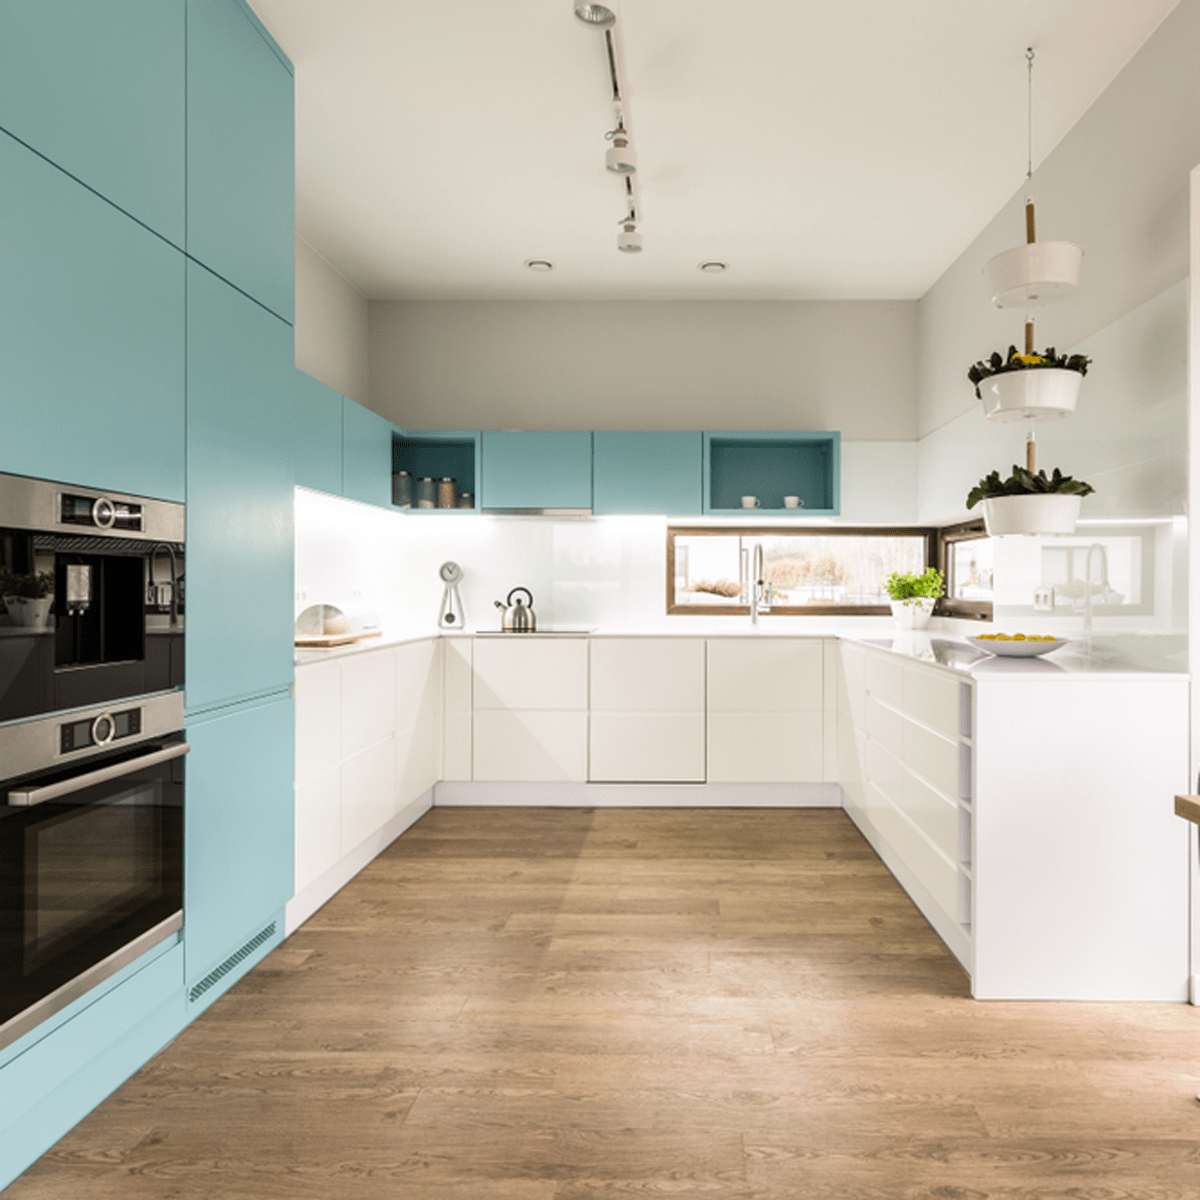 10 Kitchen Cabinetry Trends to Embrace (or Avoid) in 2018